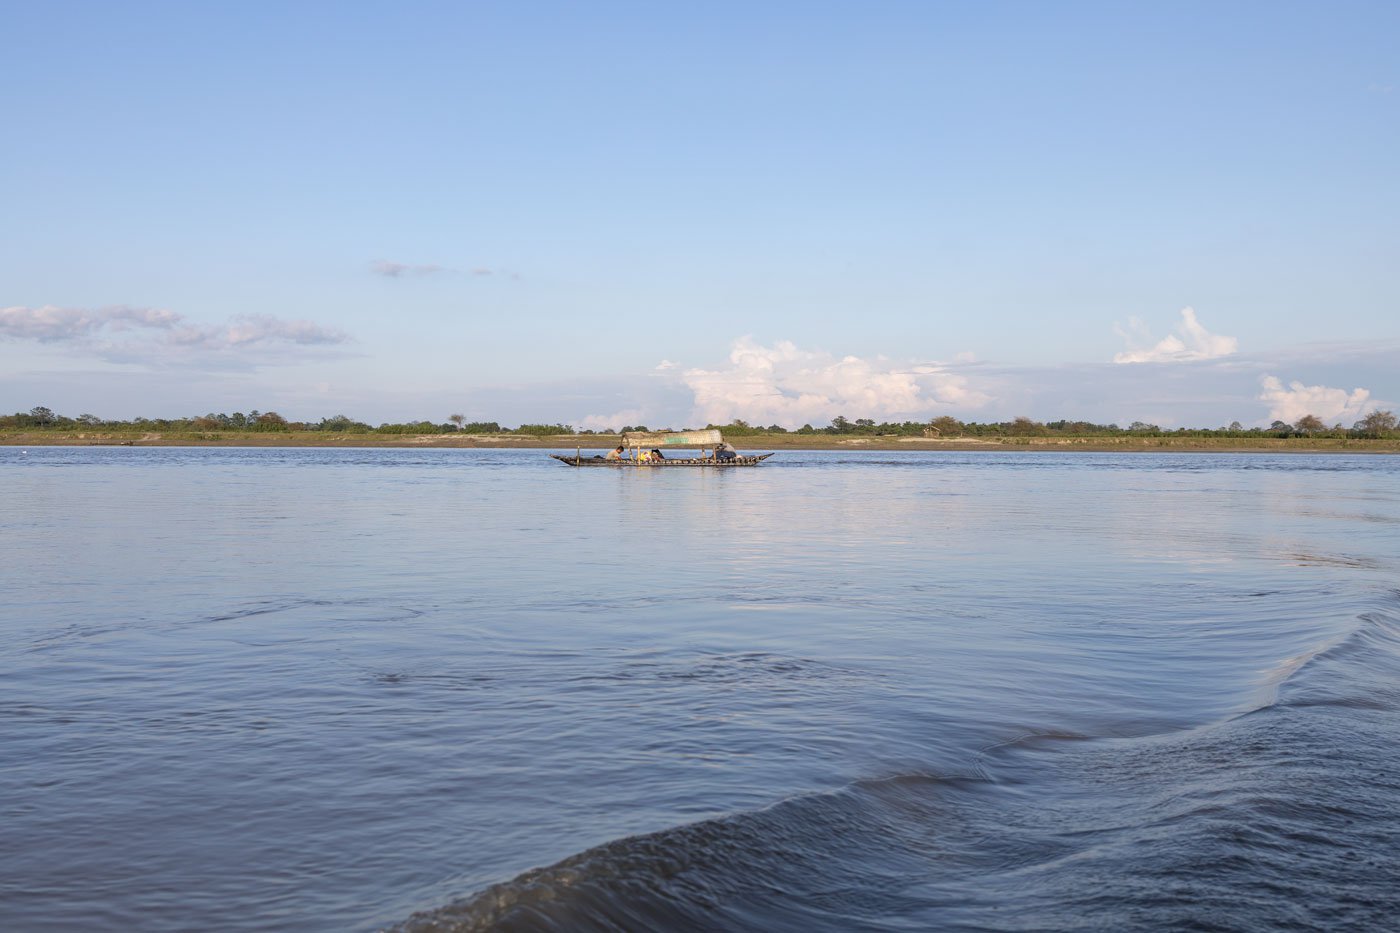 Dabli Chapori, seen in the distance, is one of many river islands – called chapori or char – on the Brahmaputra